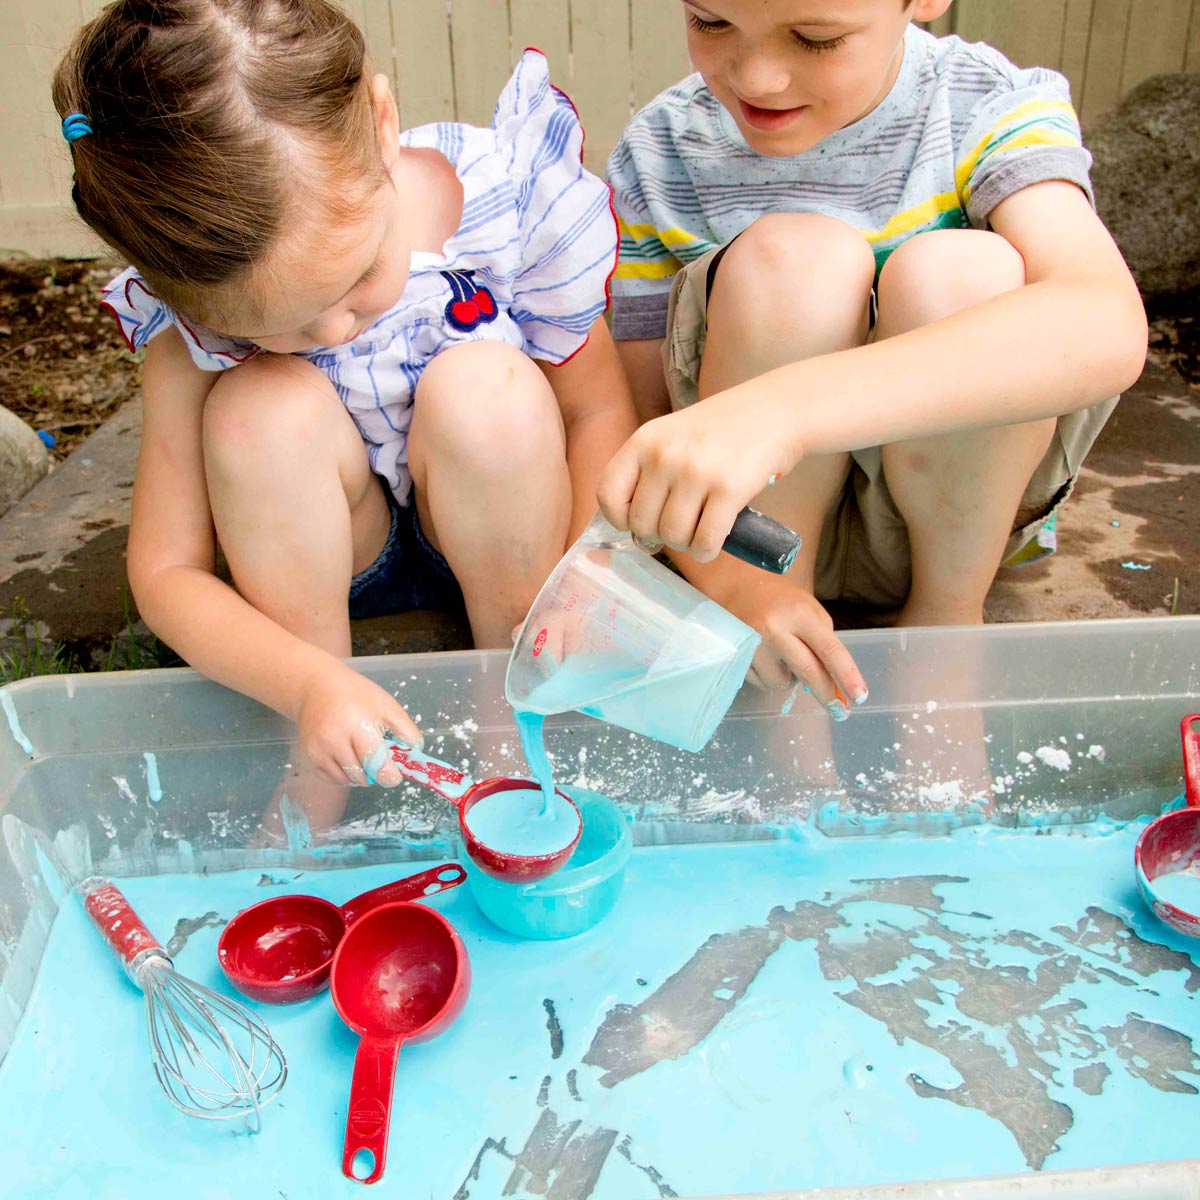 Two kids play with blue oobleck in a sensory bin. The boy is smiling as he pours oobleck into a measuring cup that the girl is holding.